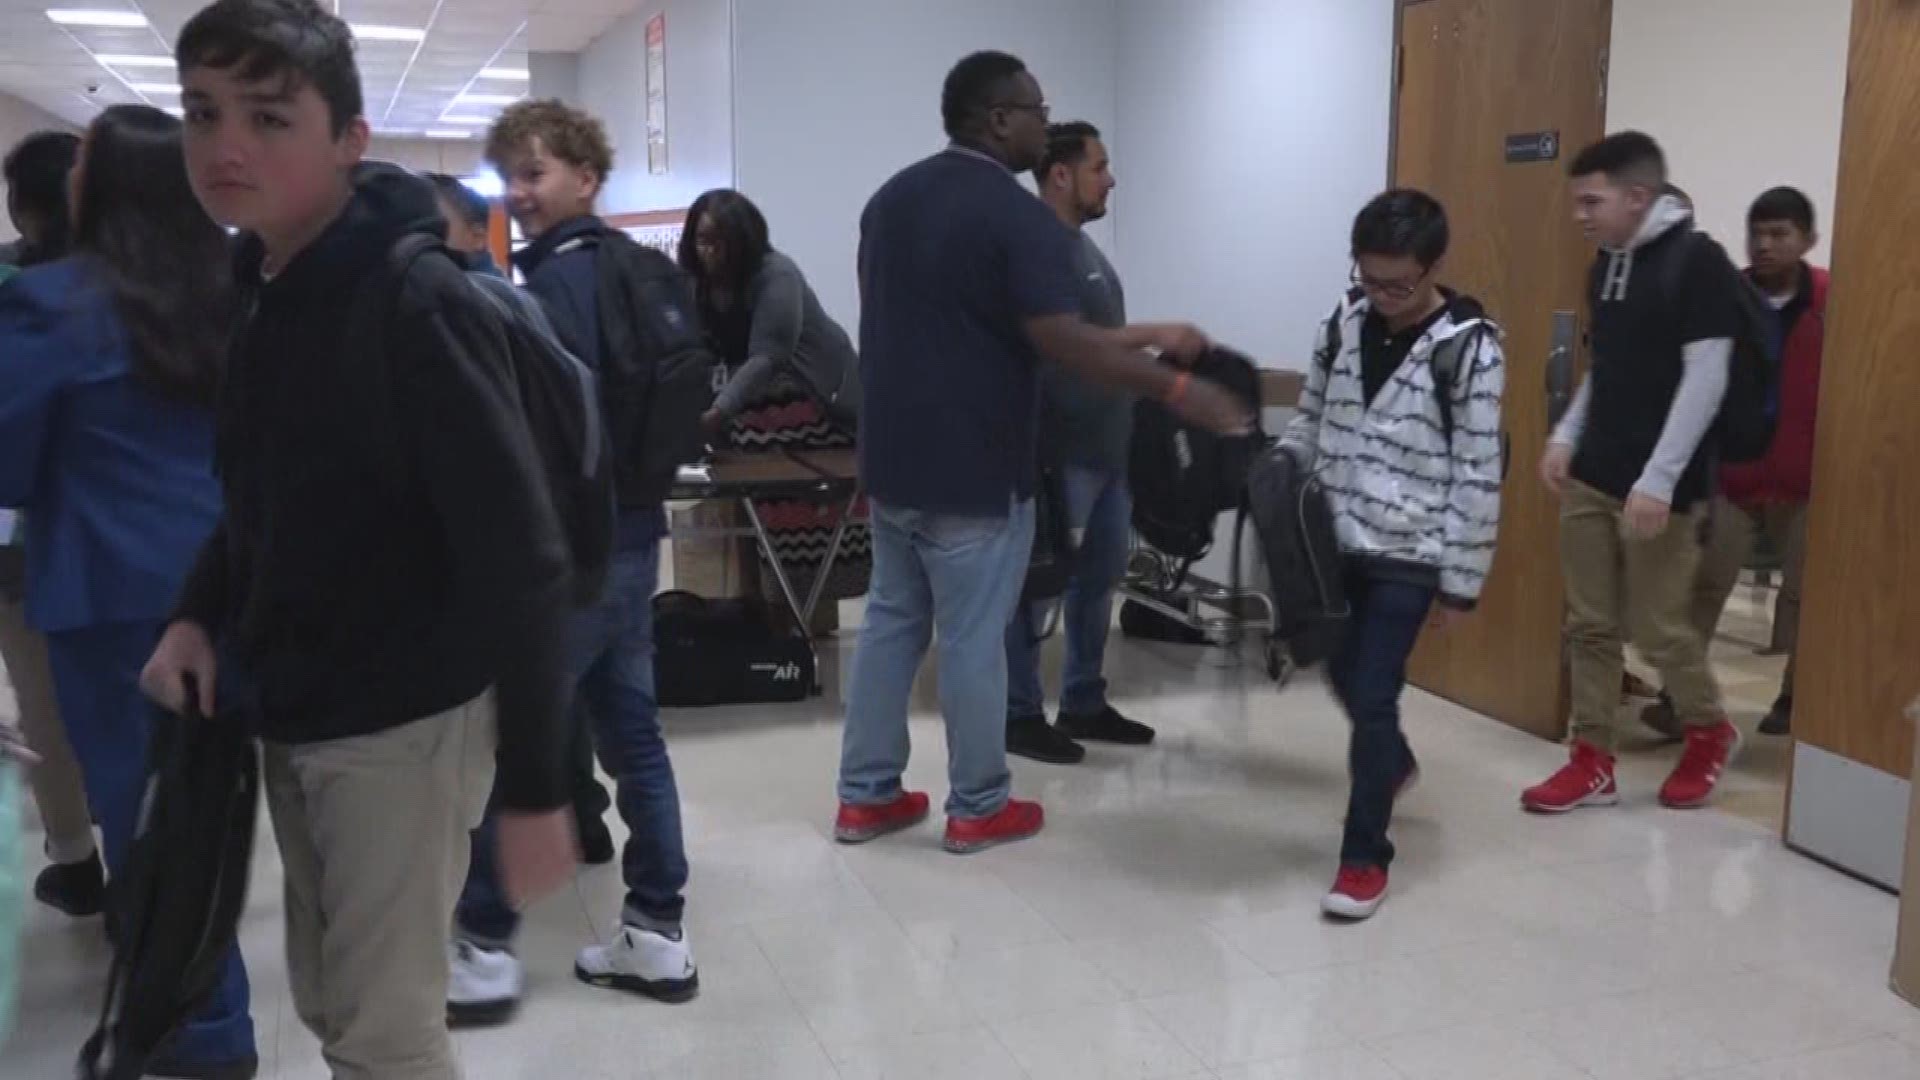 Verizon is supporting Dobie Middle School by supplying each student with a free backpack with school supplies inside.